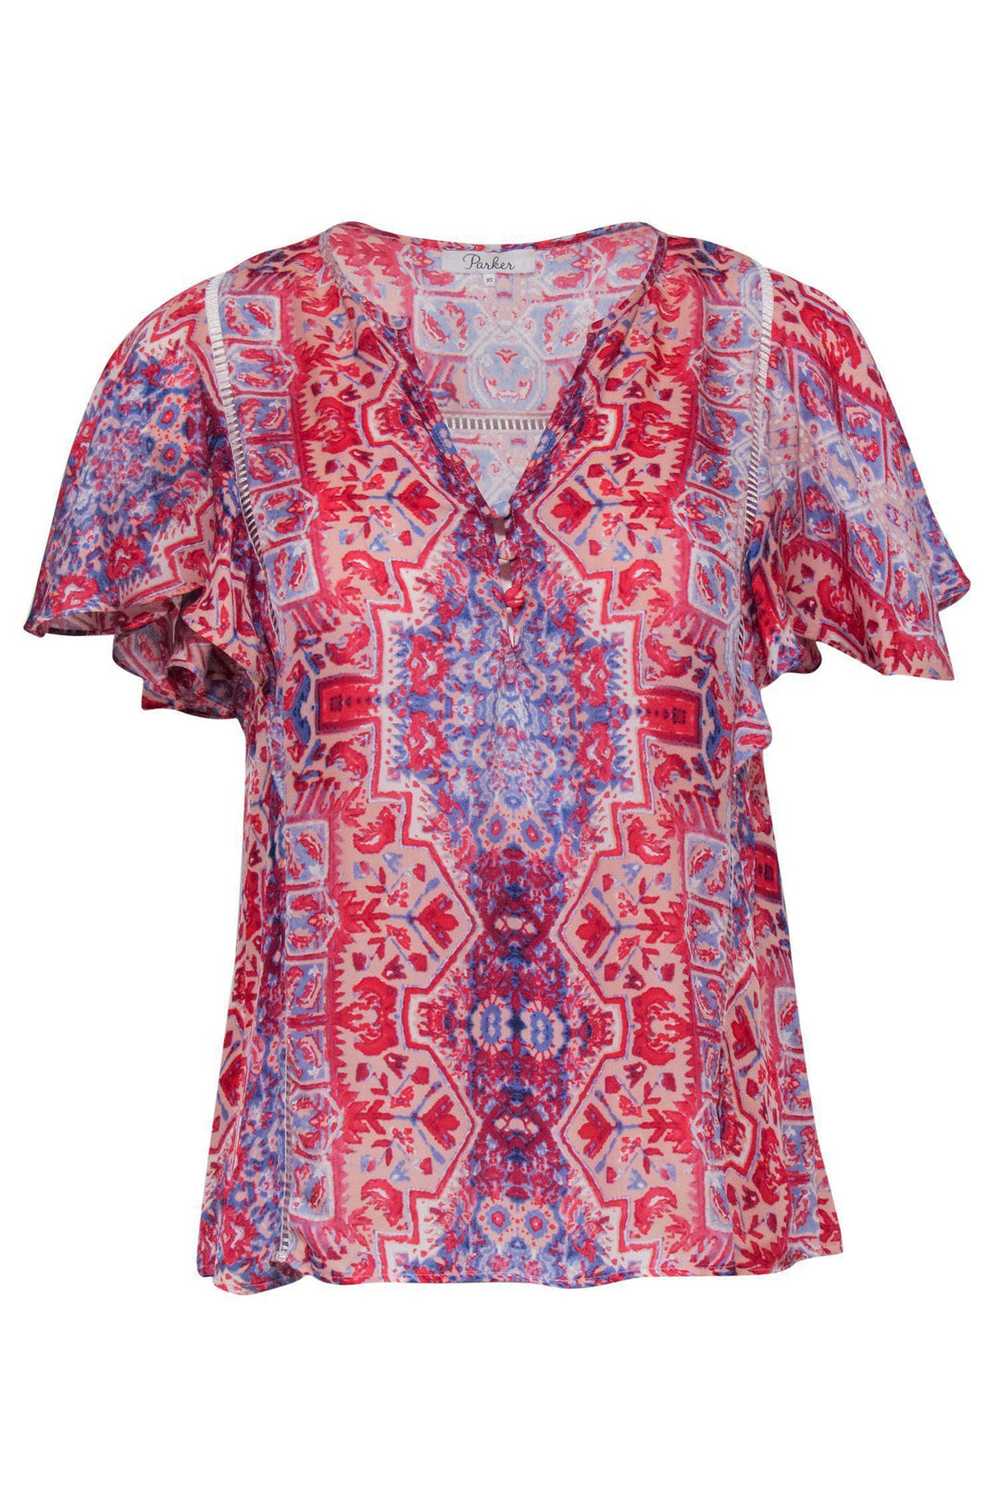 Parker - Red & Blue Ruffle Sleeve Printed Blouse … - image 1